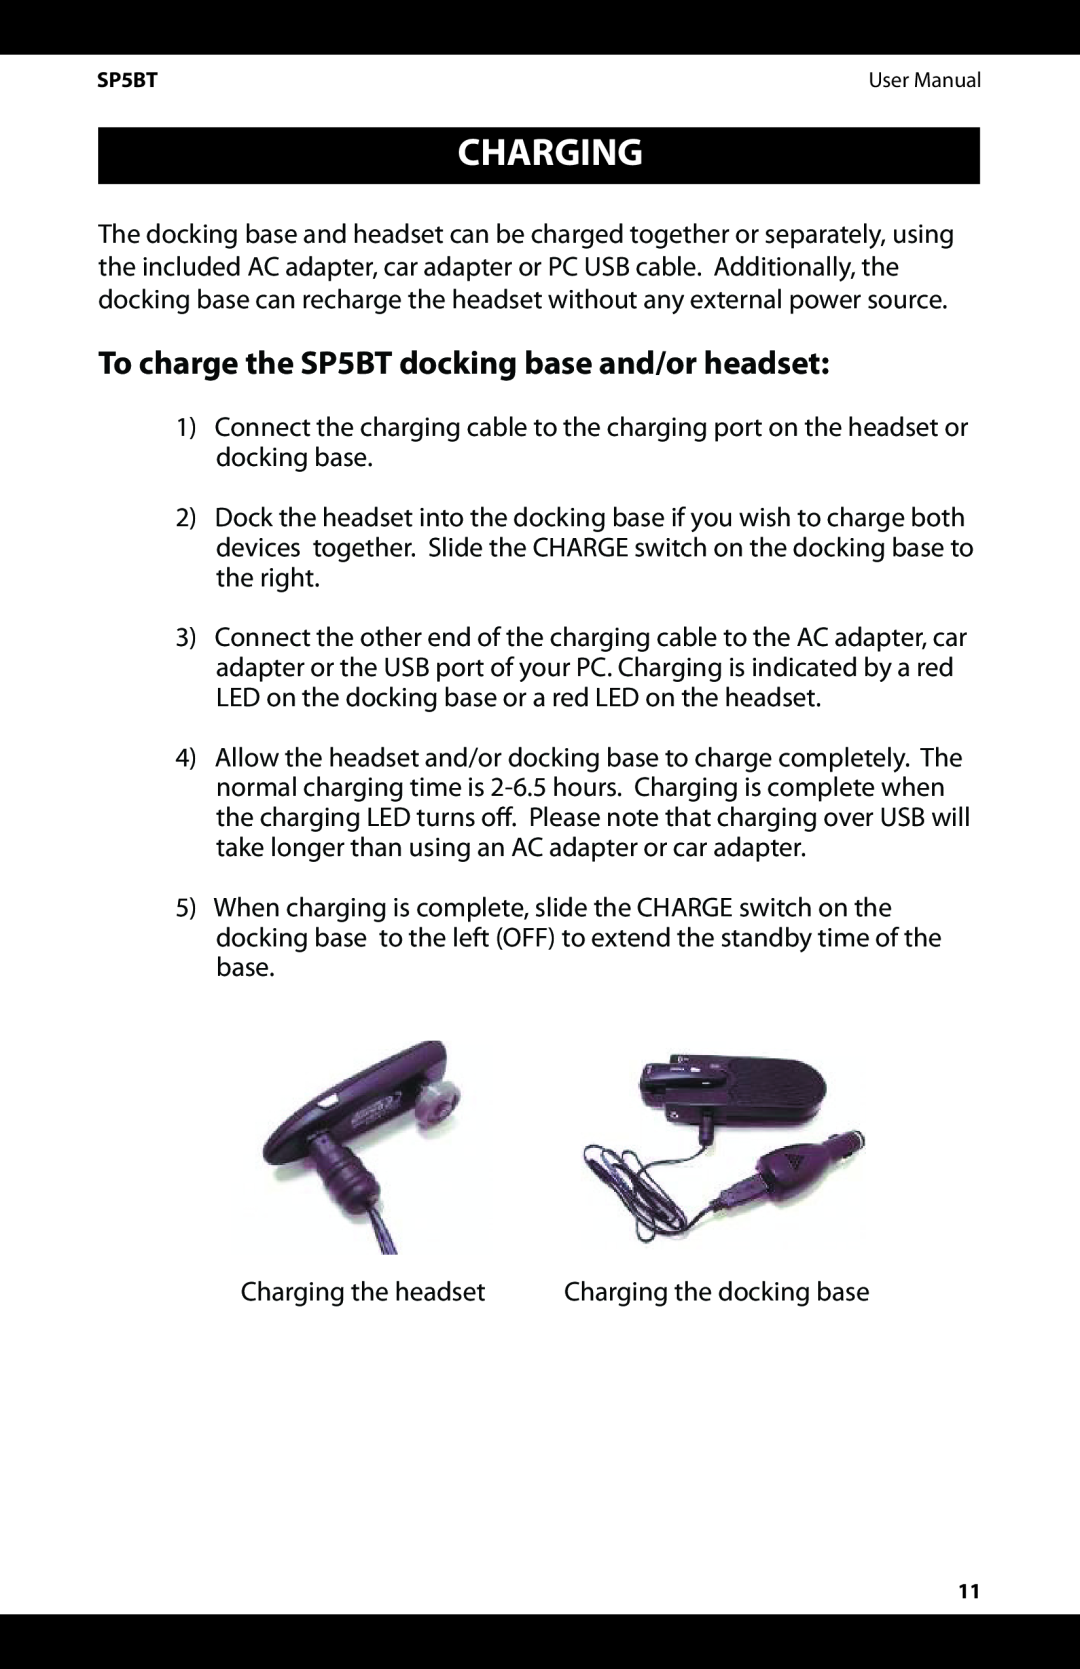 iSymphony user manual Charging, To charge the SP5BT docking base and/or headset 